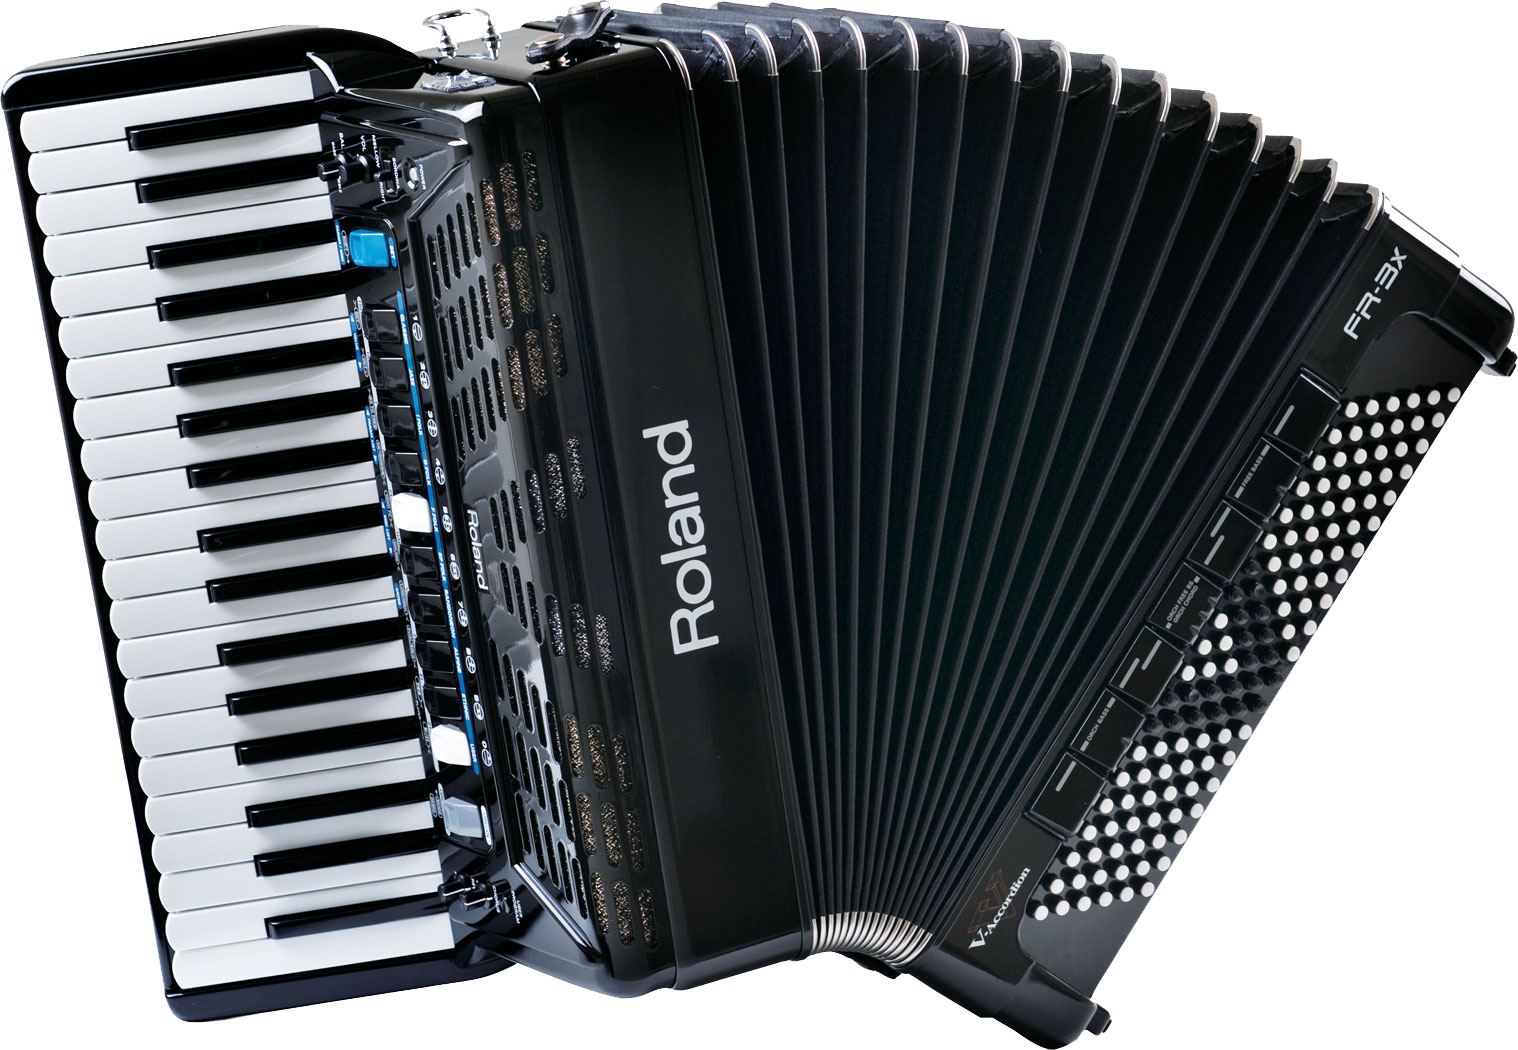 Accordion Transparent Png - Accordion, Transparent background PNG HD thumbnail